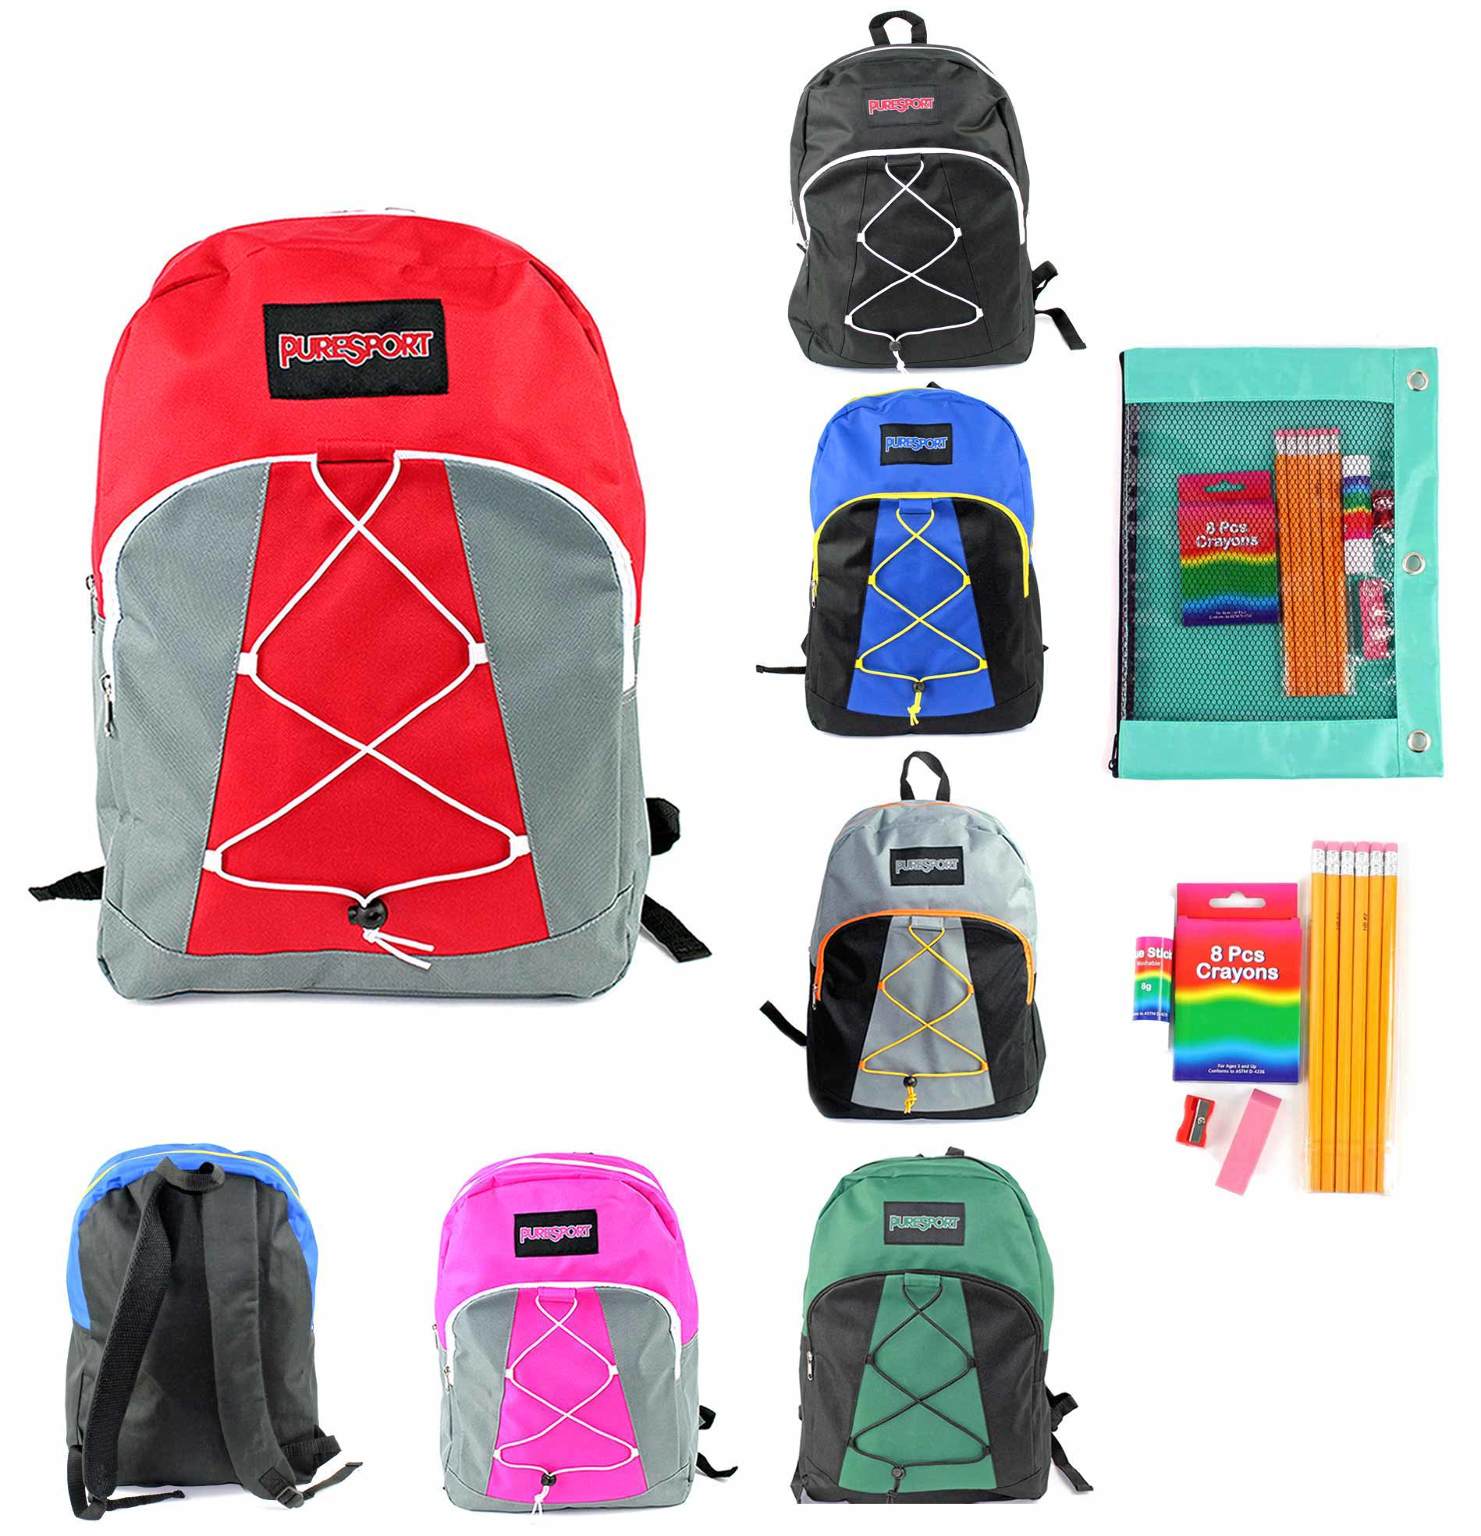 Trailmaker Backpack and 20-Piece School Supply Set, Assorted Colors, Pack of 24 Sets